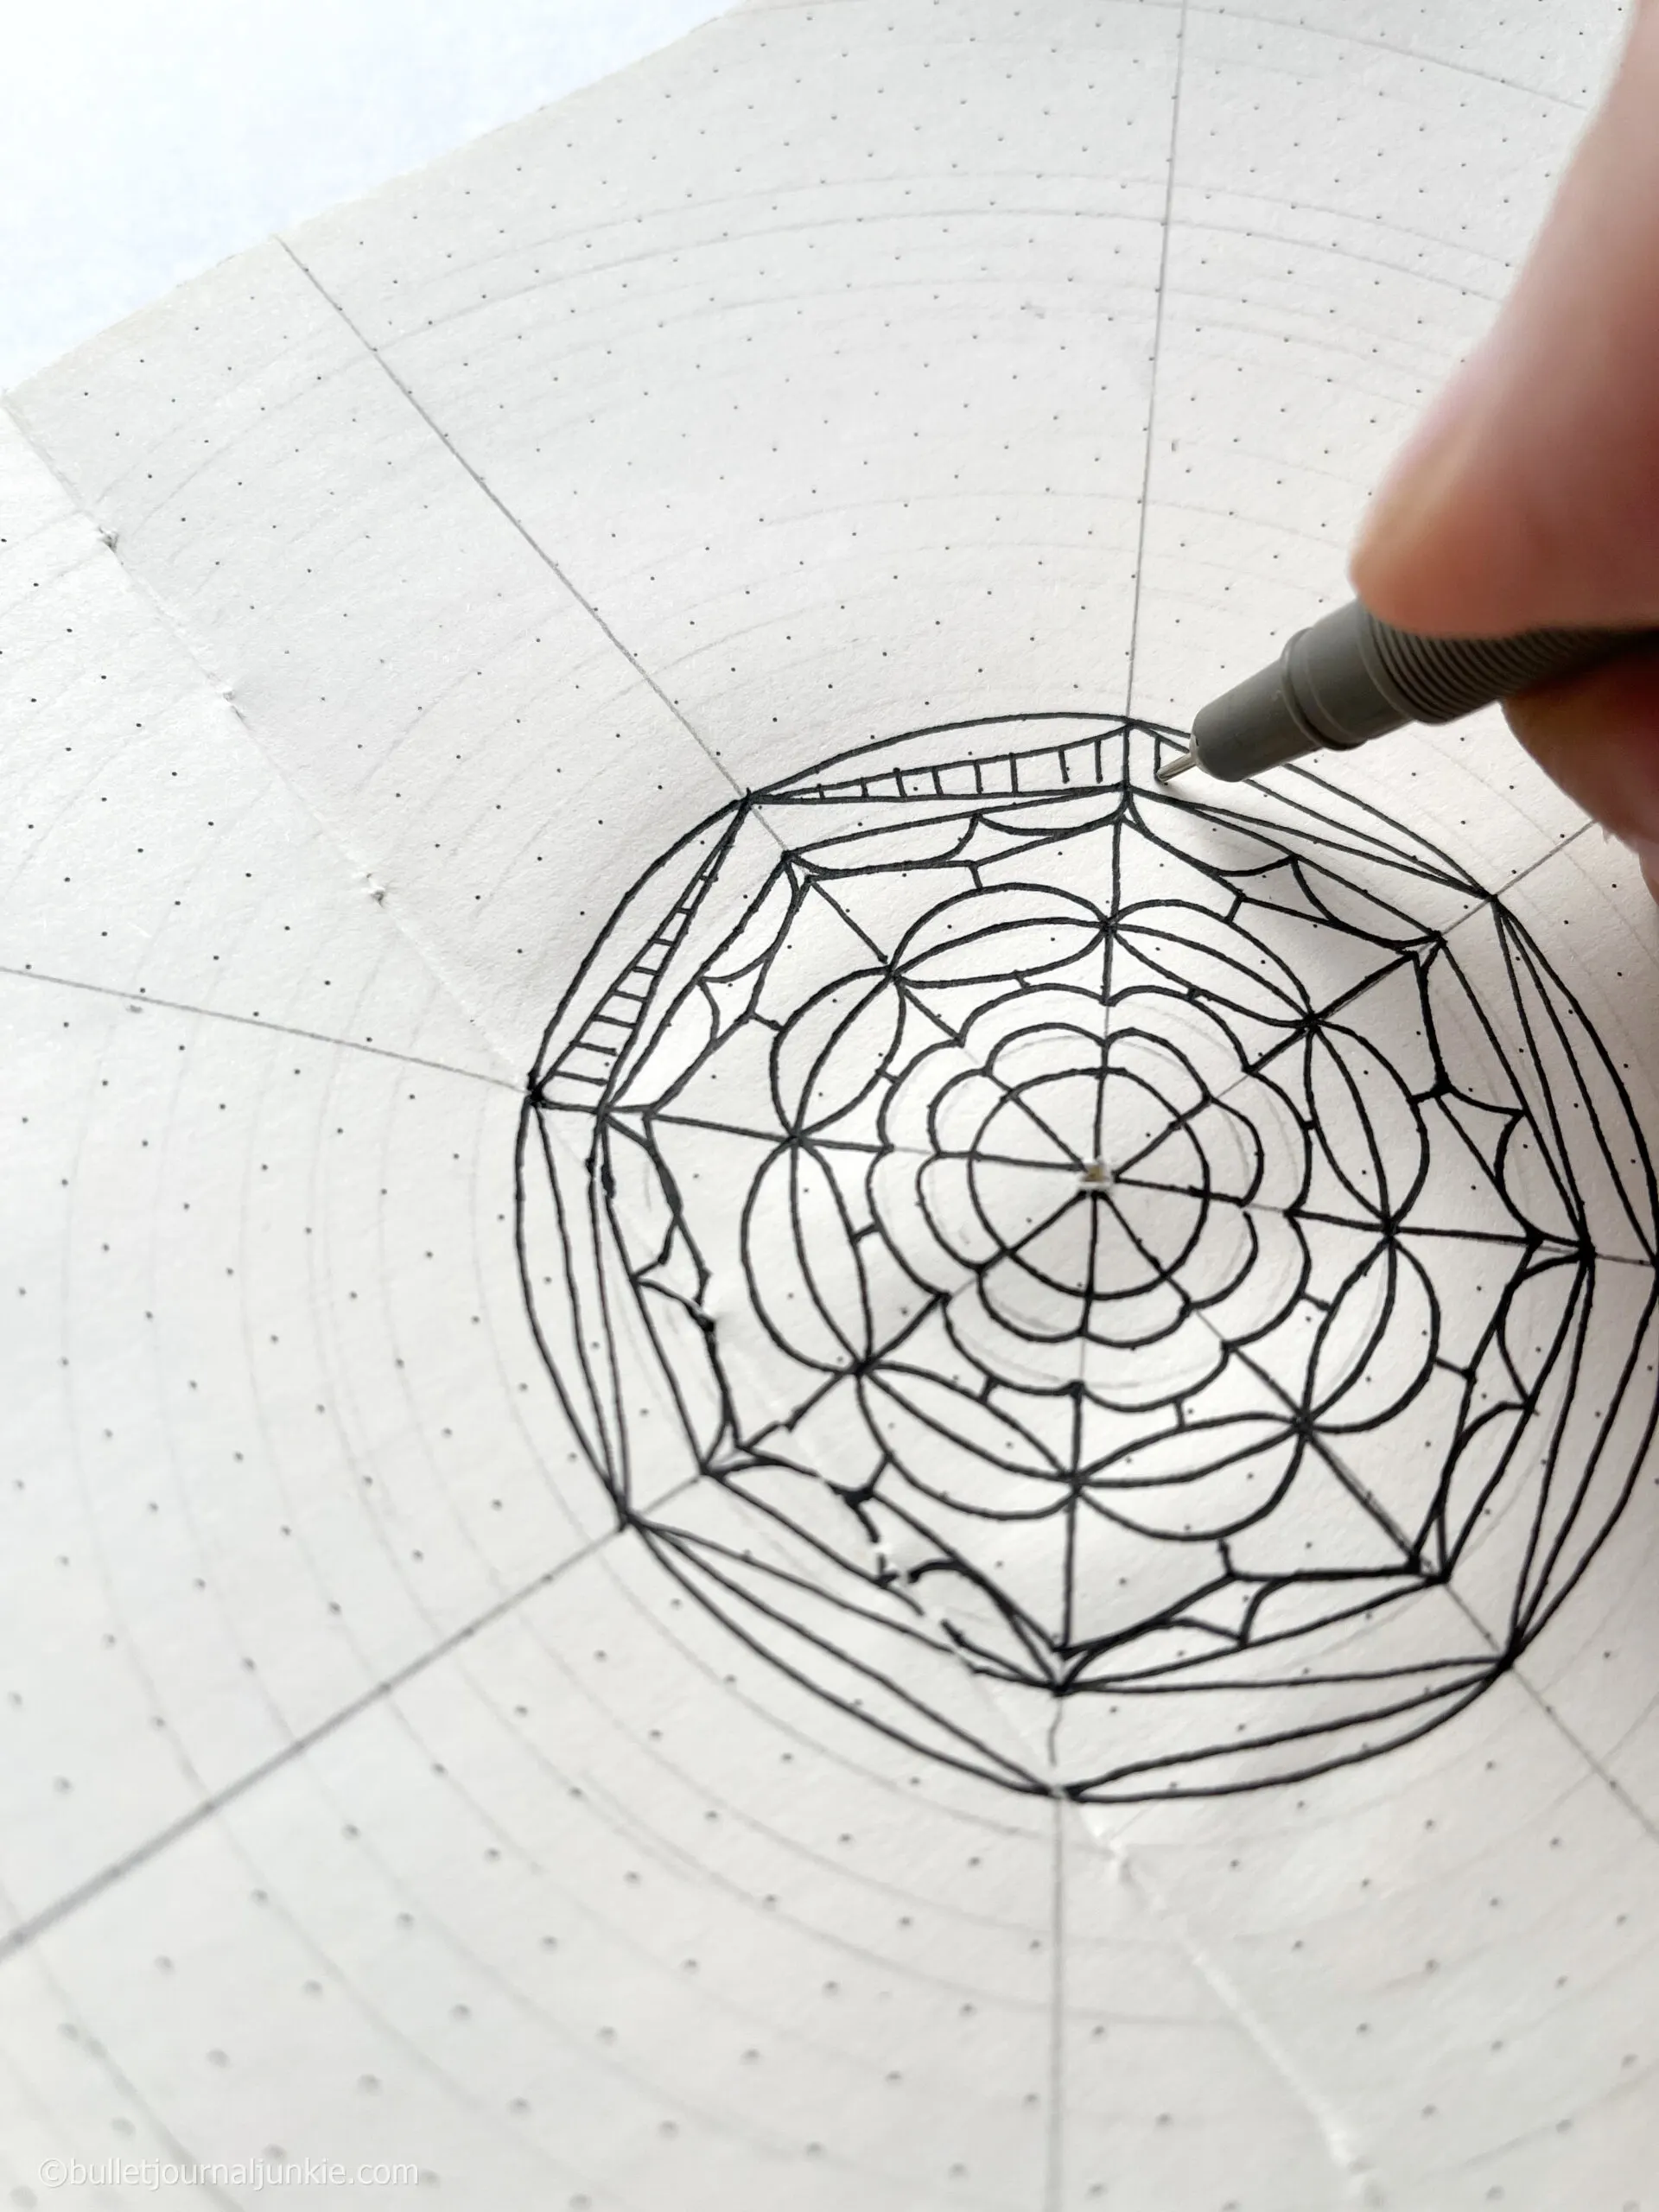 A pen drawing a mandala as part of a mindfulness practice.